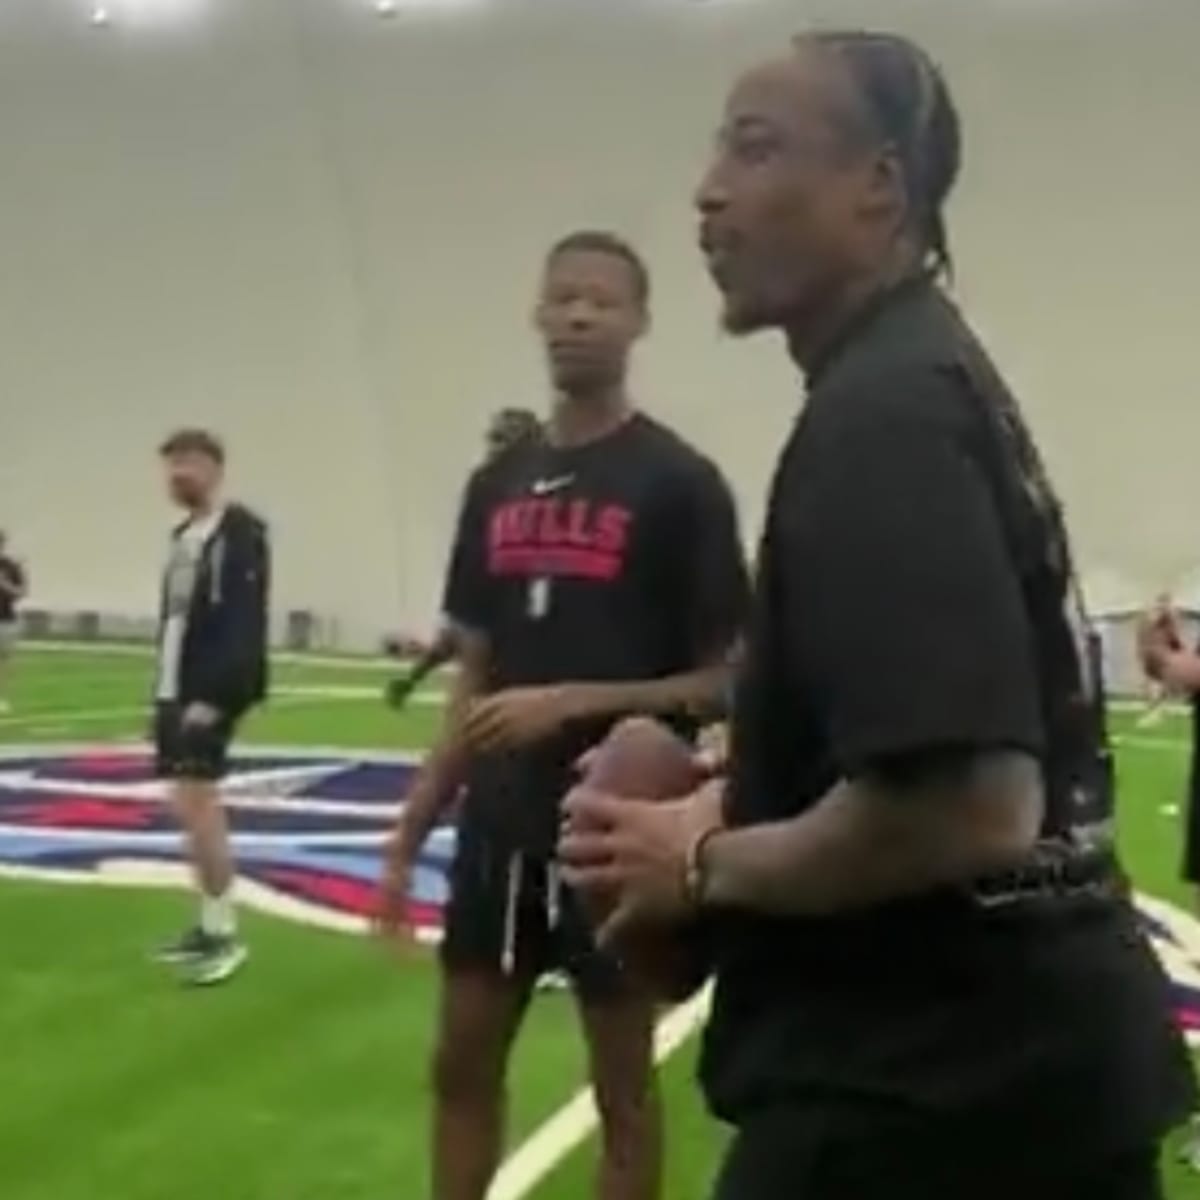 All Access: DeMar DeRozan has a CANNON!, Training camp wraps up in  Nashville